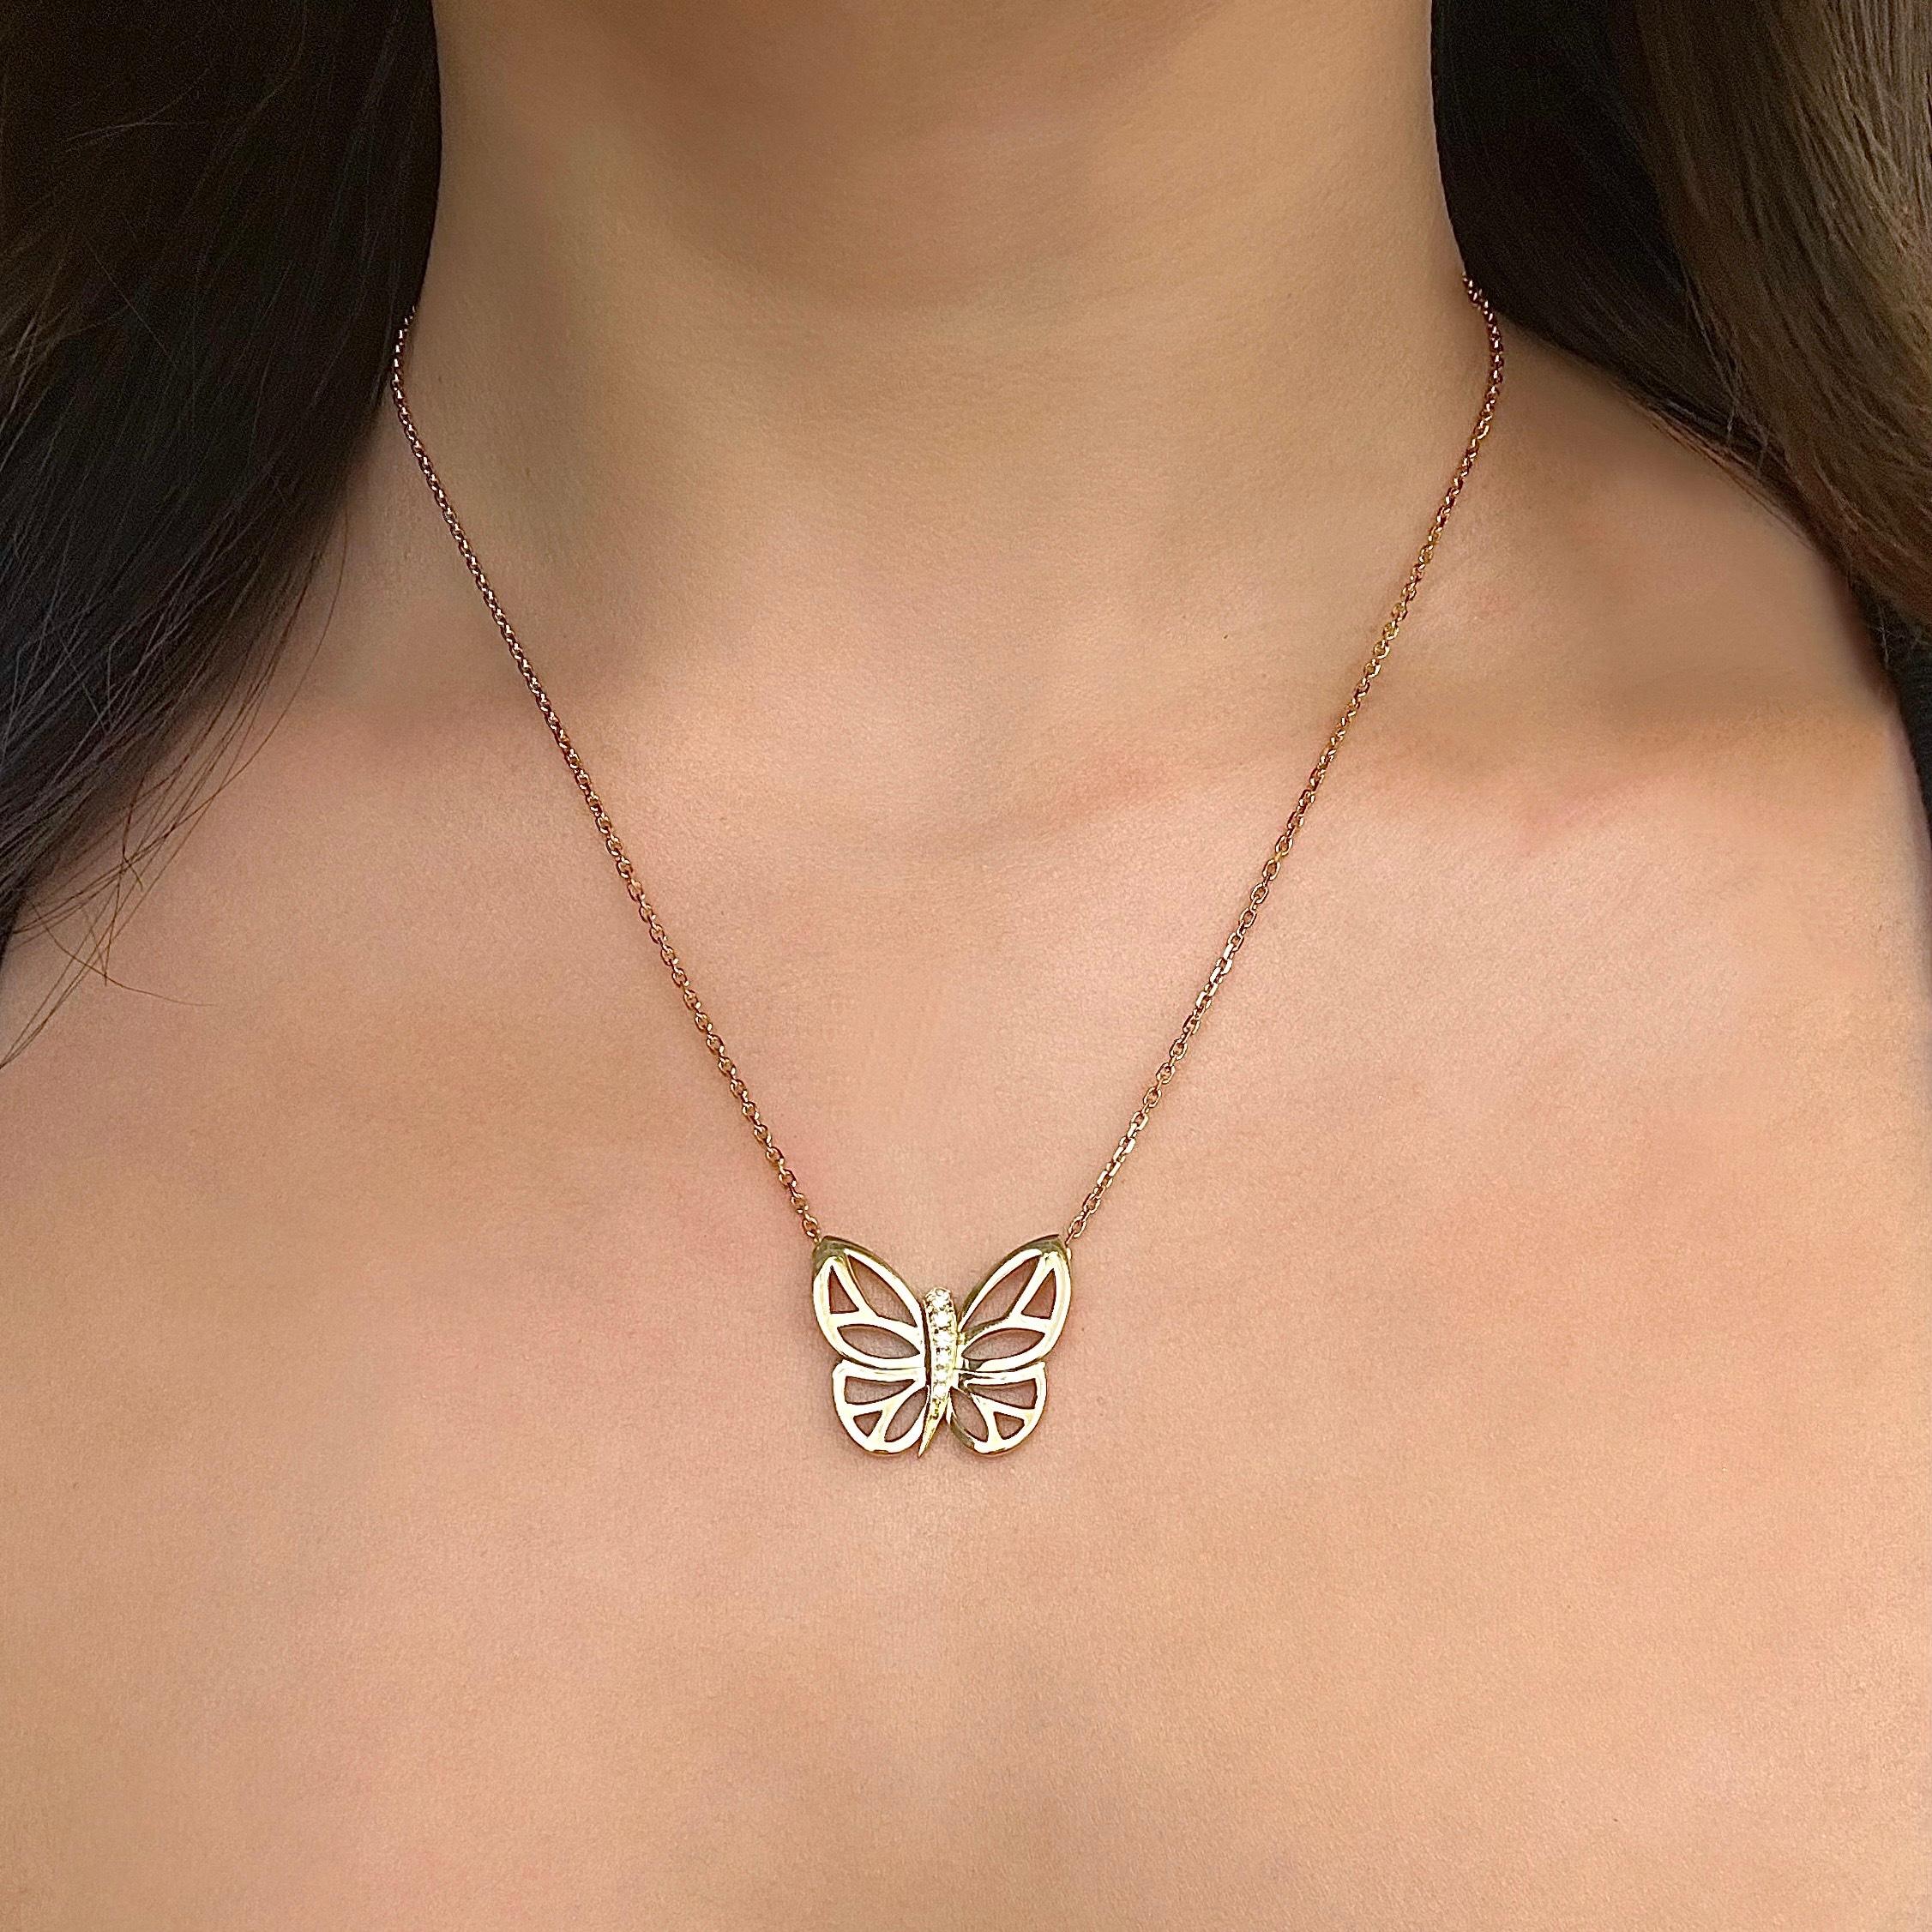 Round Cut Van Cleef & Arpels Yellow Gold Diamond Butterfly Pendant Necklace